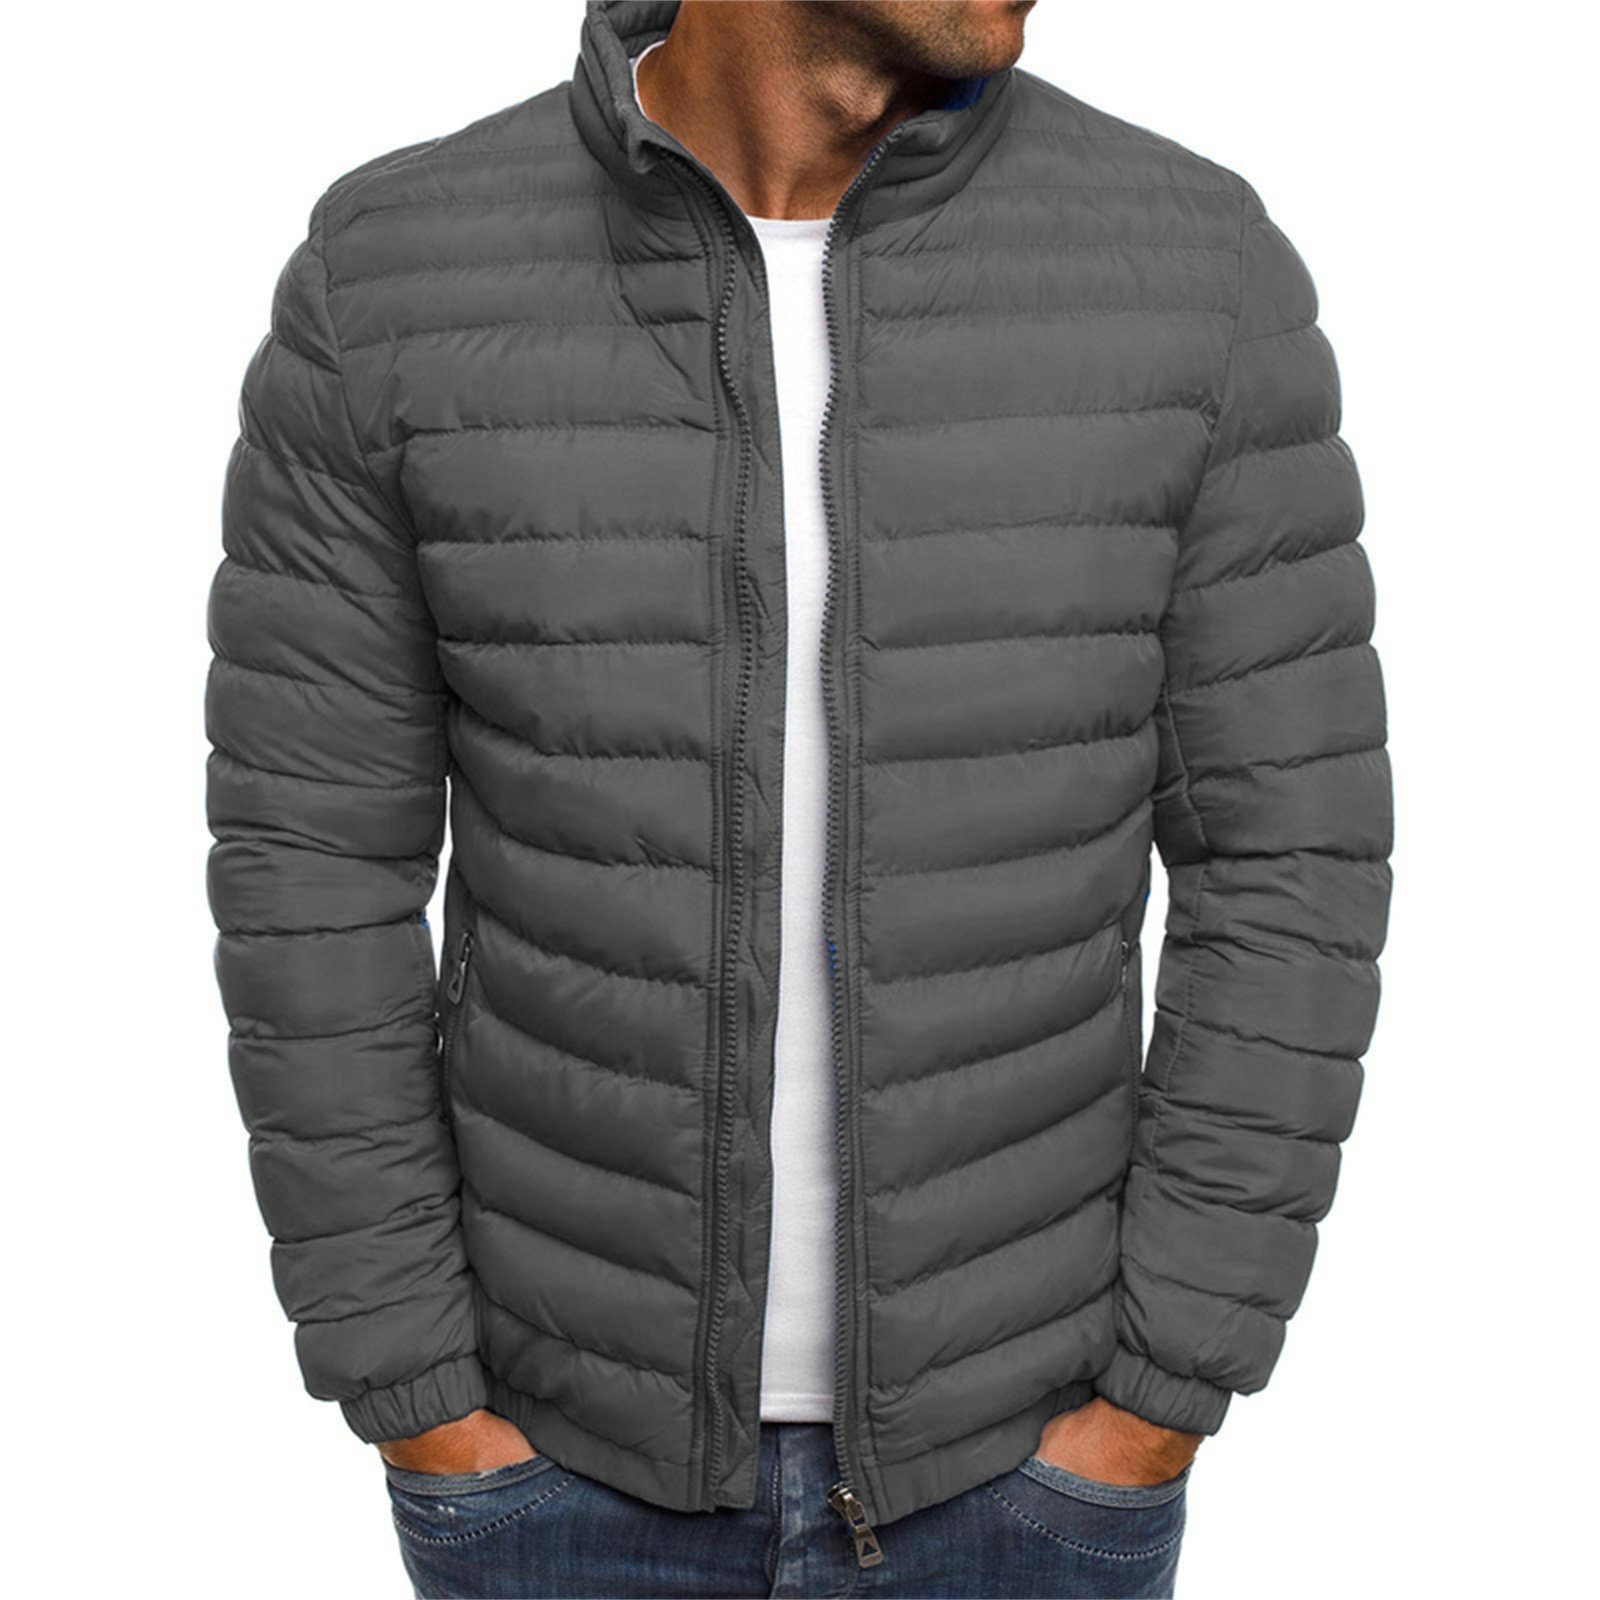 TIHLMK Men's Down Jackets & Coats Deals Clearance Men's Solid Color Jacket Cotton Padded Jacket Fashion Cotton Padded Jacket Men's Warm Cotton Padded Jacket Gray - image 2 of 3